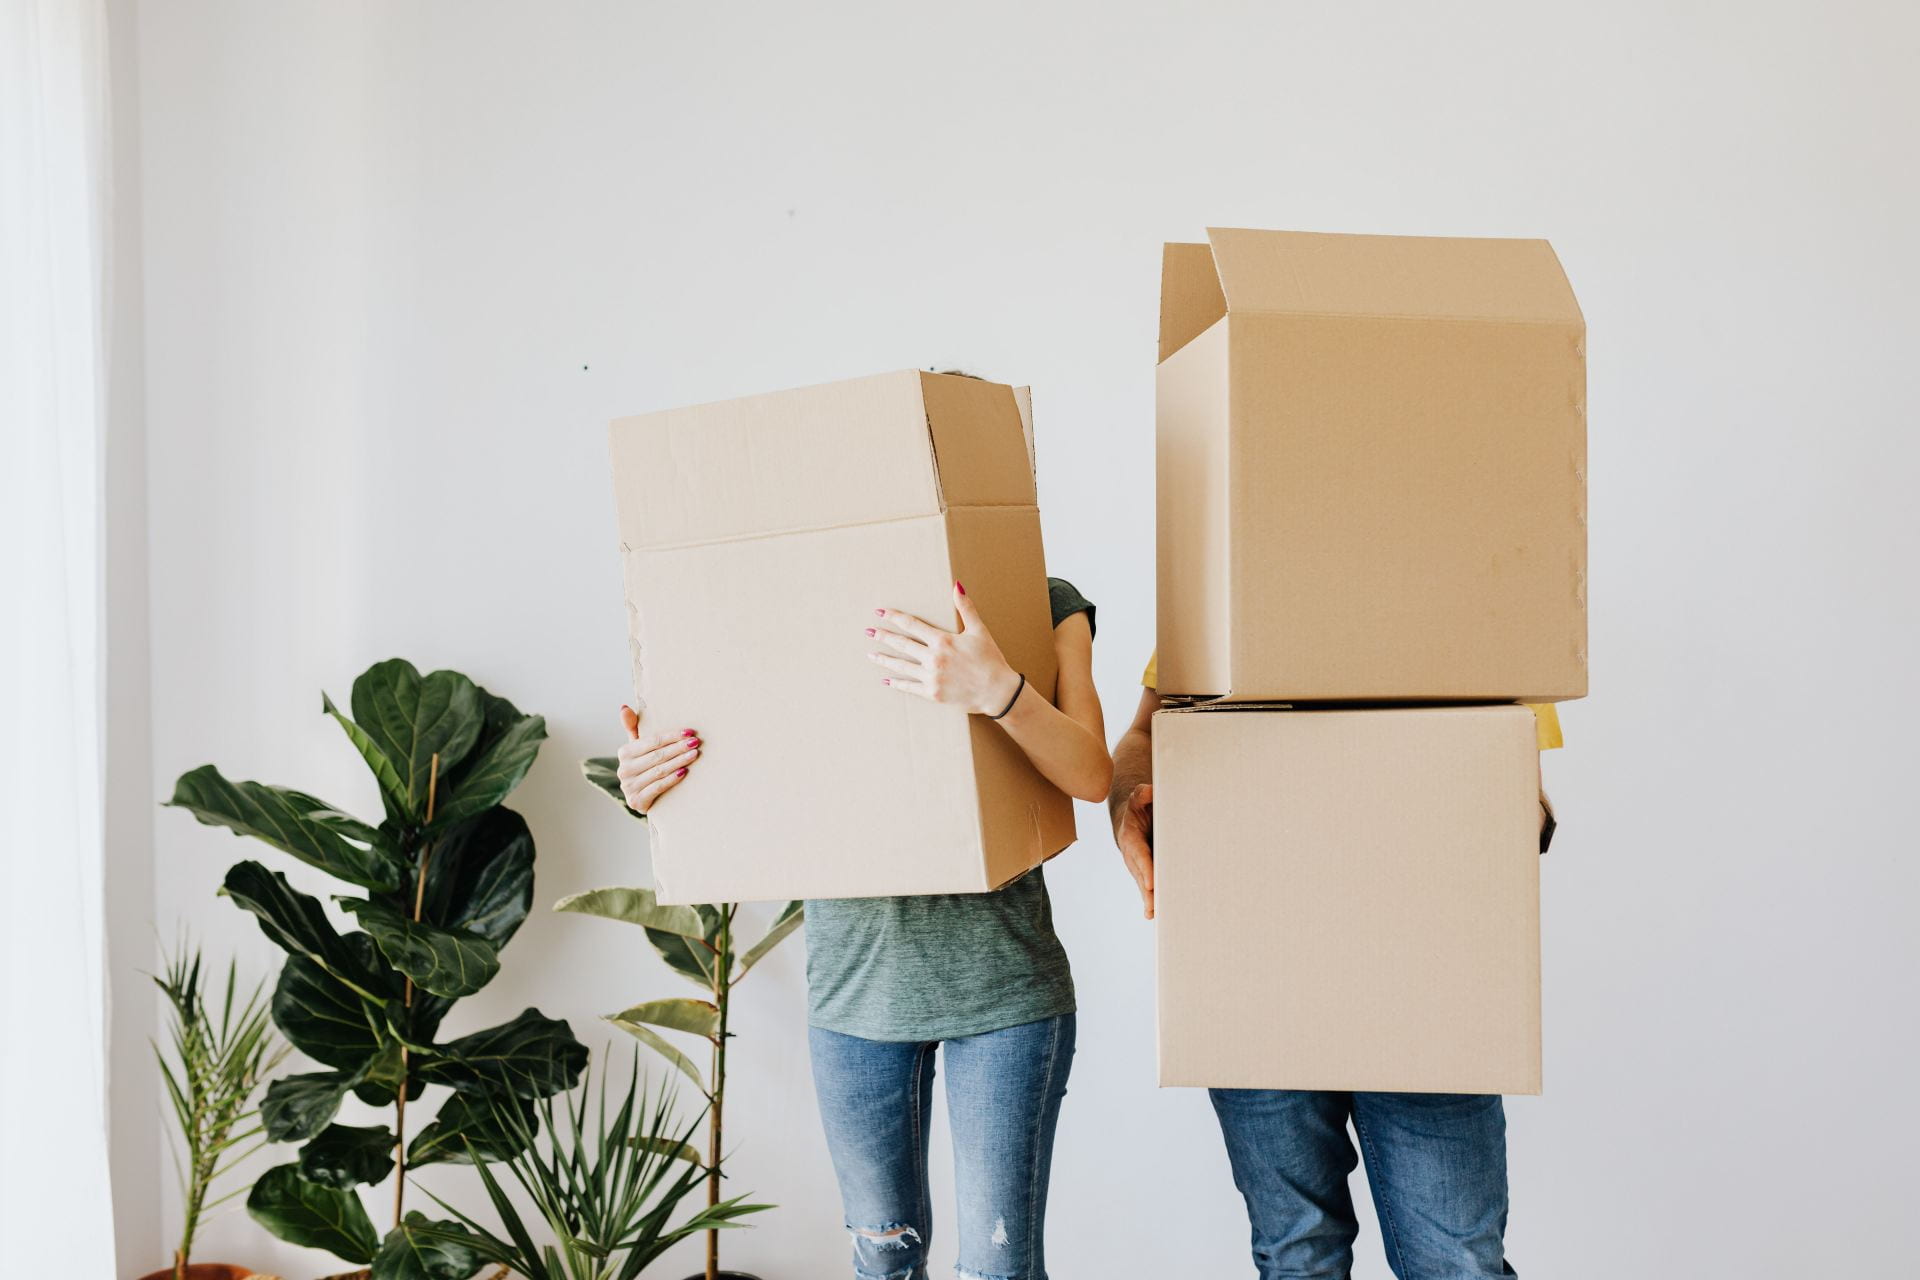 Two people holding boxes. The person on the left is holding one box and the person on the right is holding two. The boxes are large and cover their faces. In the background there is a white wall and some house plants.